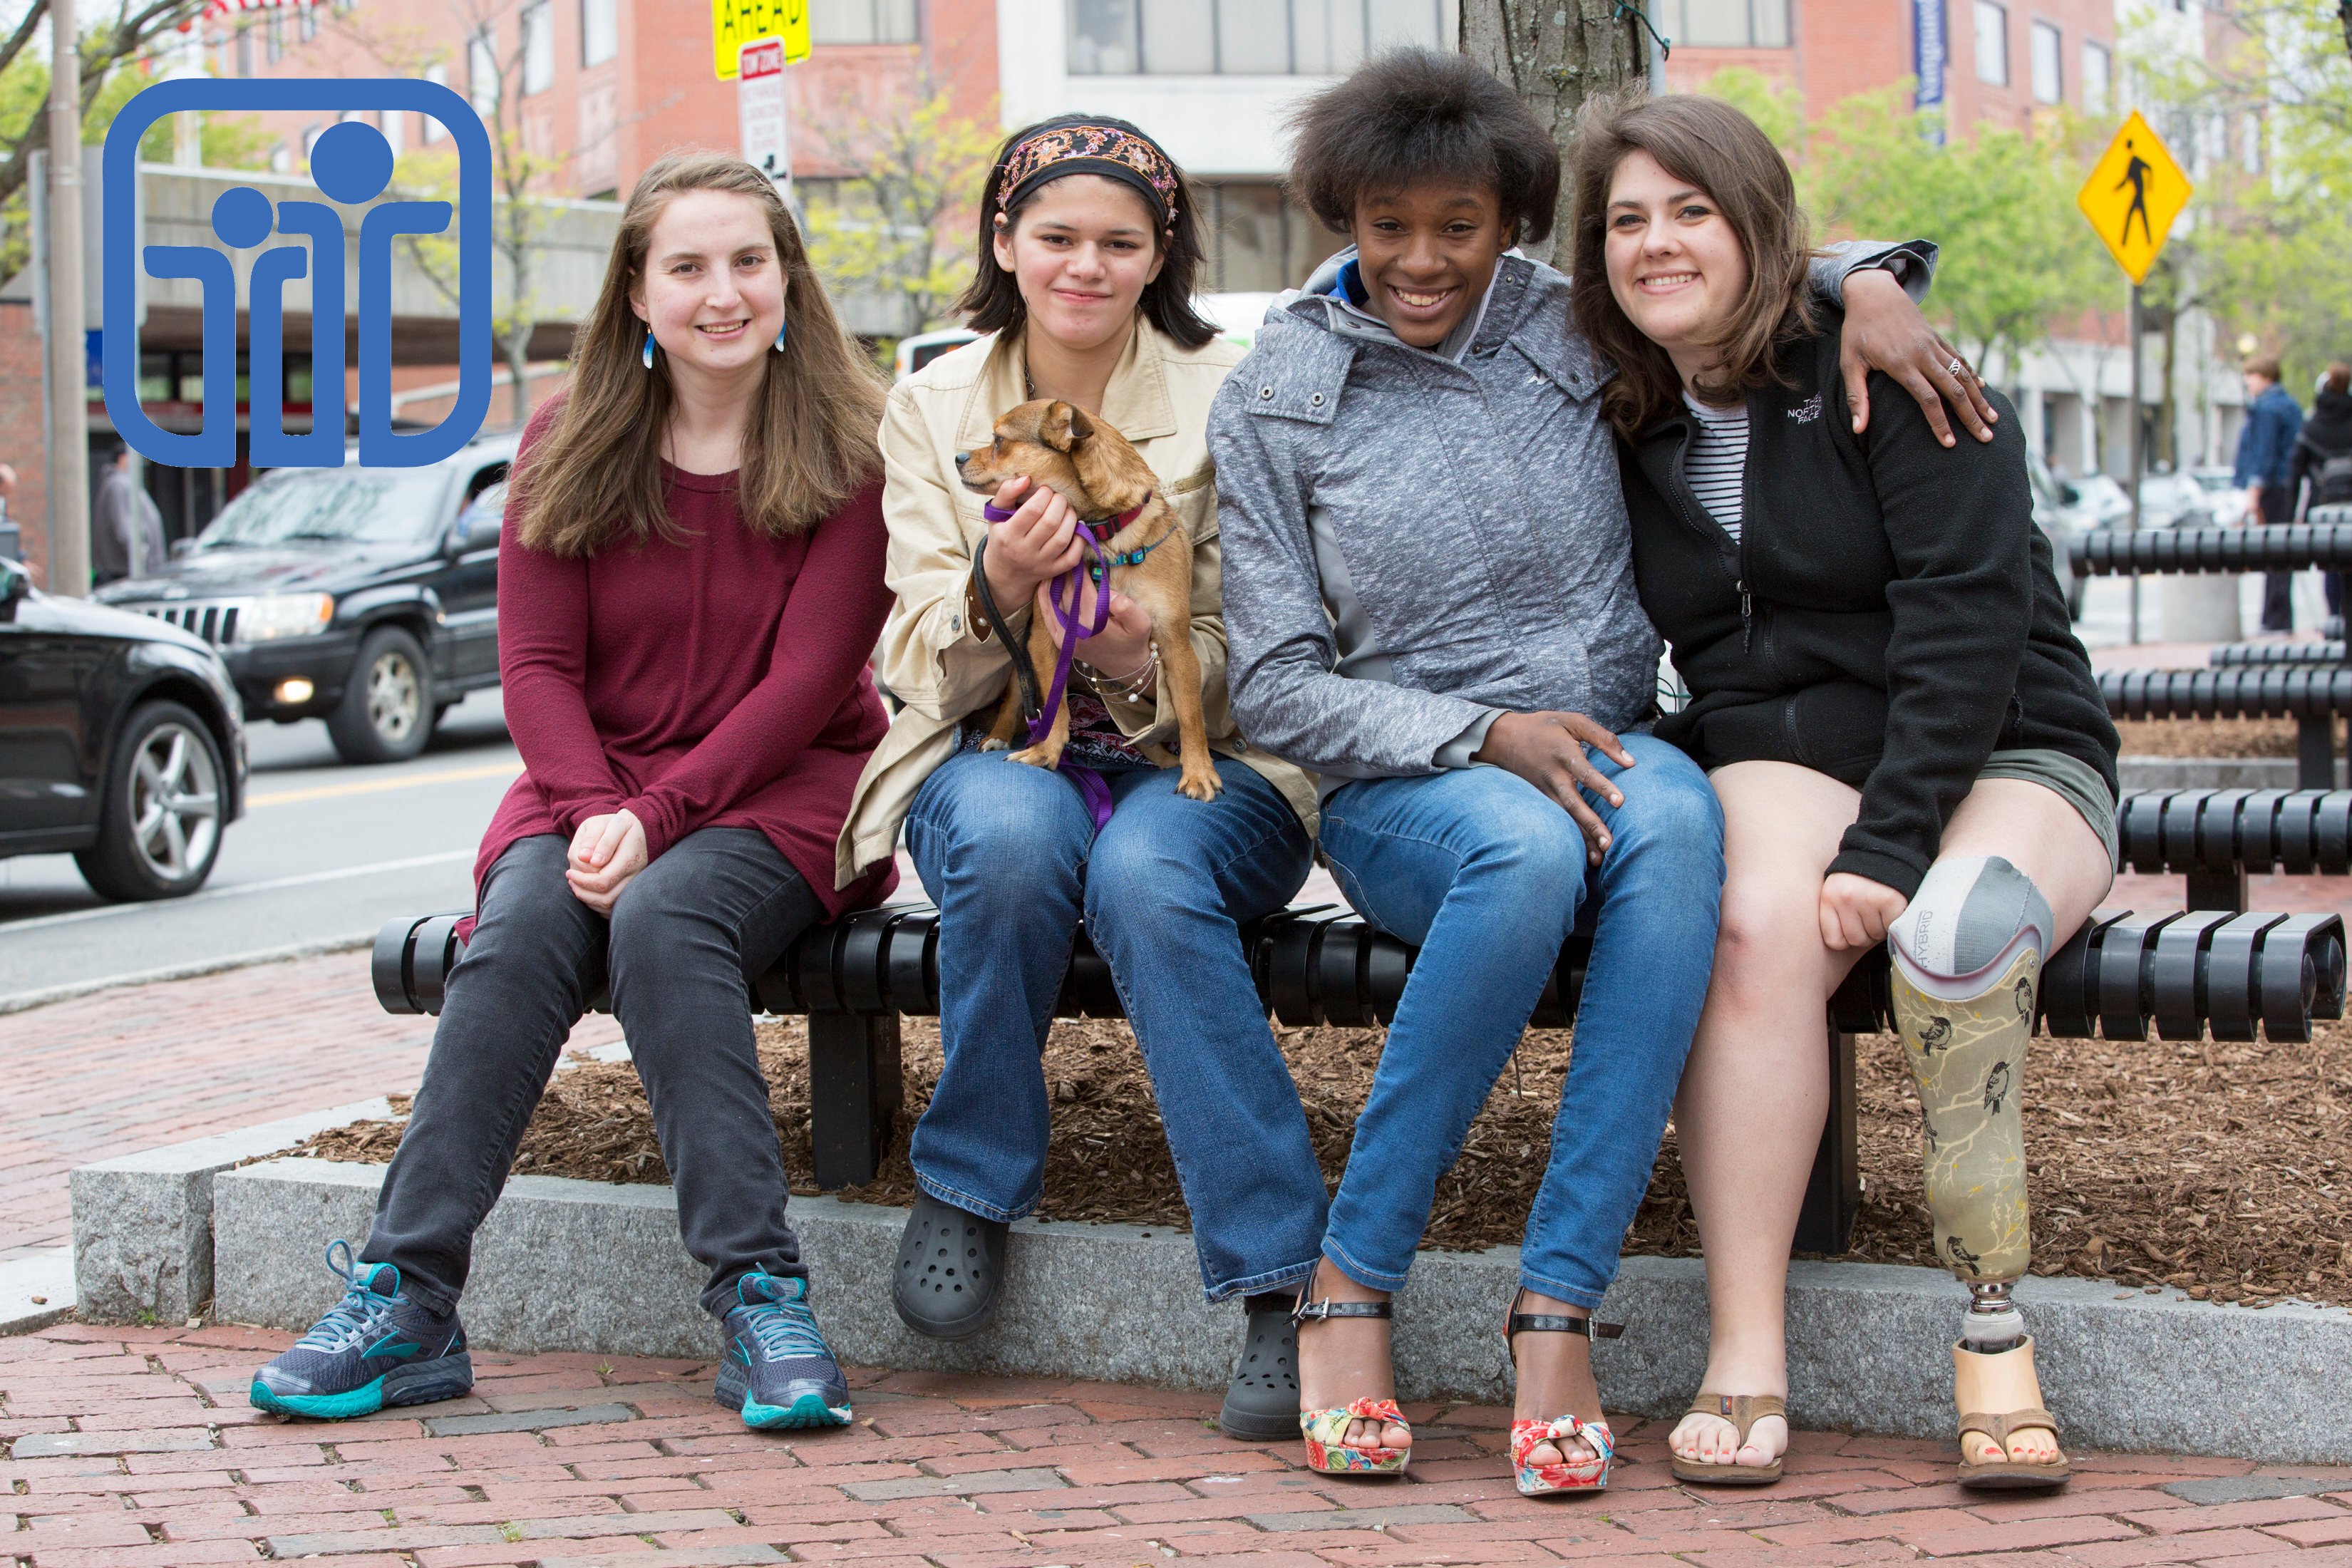 Four young women, one holding small dog, one with prosthetic leg, sit close together smilling on a sidewalk bench